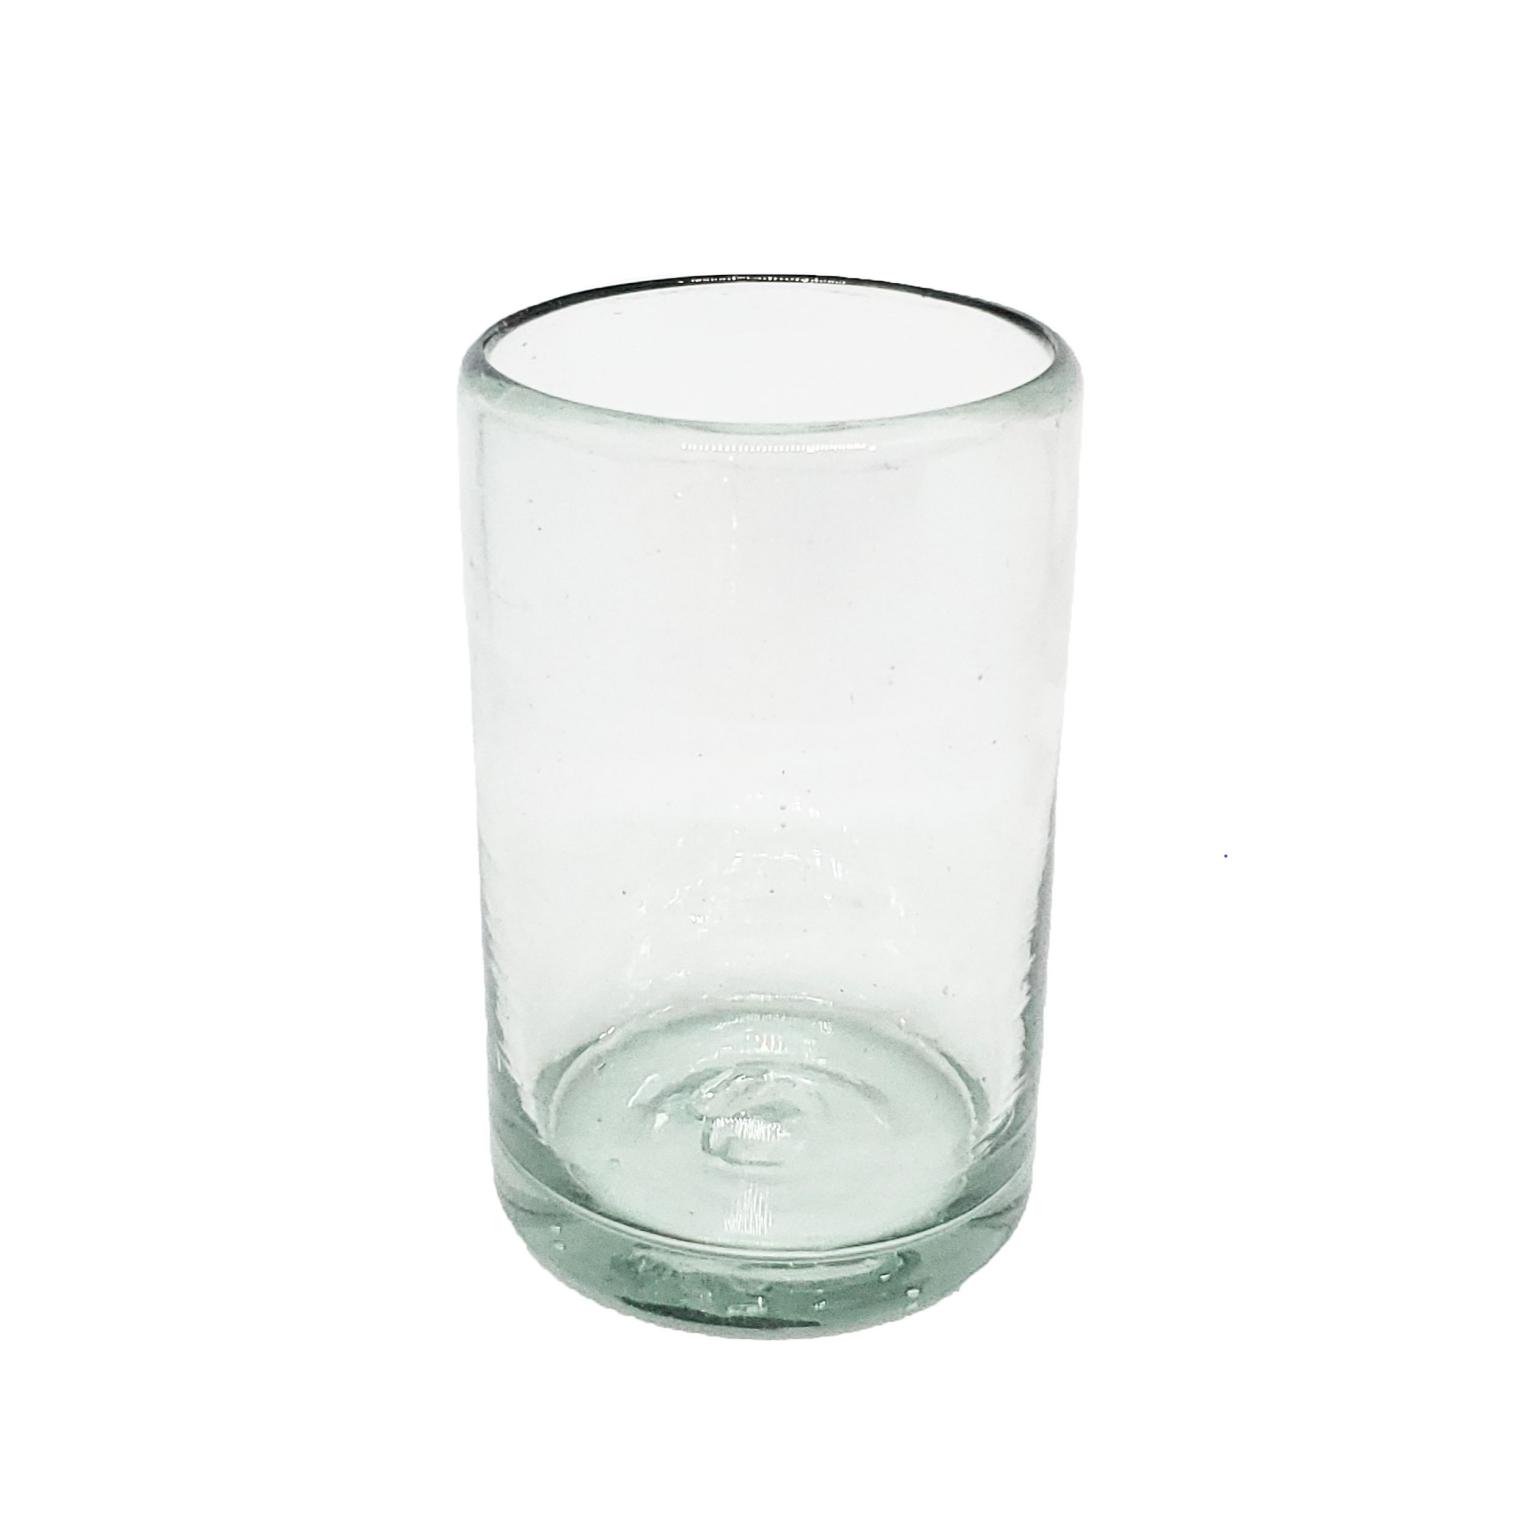 Mexican Glasses / Clear 9 oz Juice Glasses (set of 6) / These handcrafted glasses deliver a classic touch to your favorite drink.